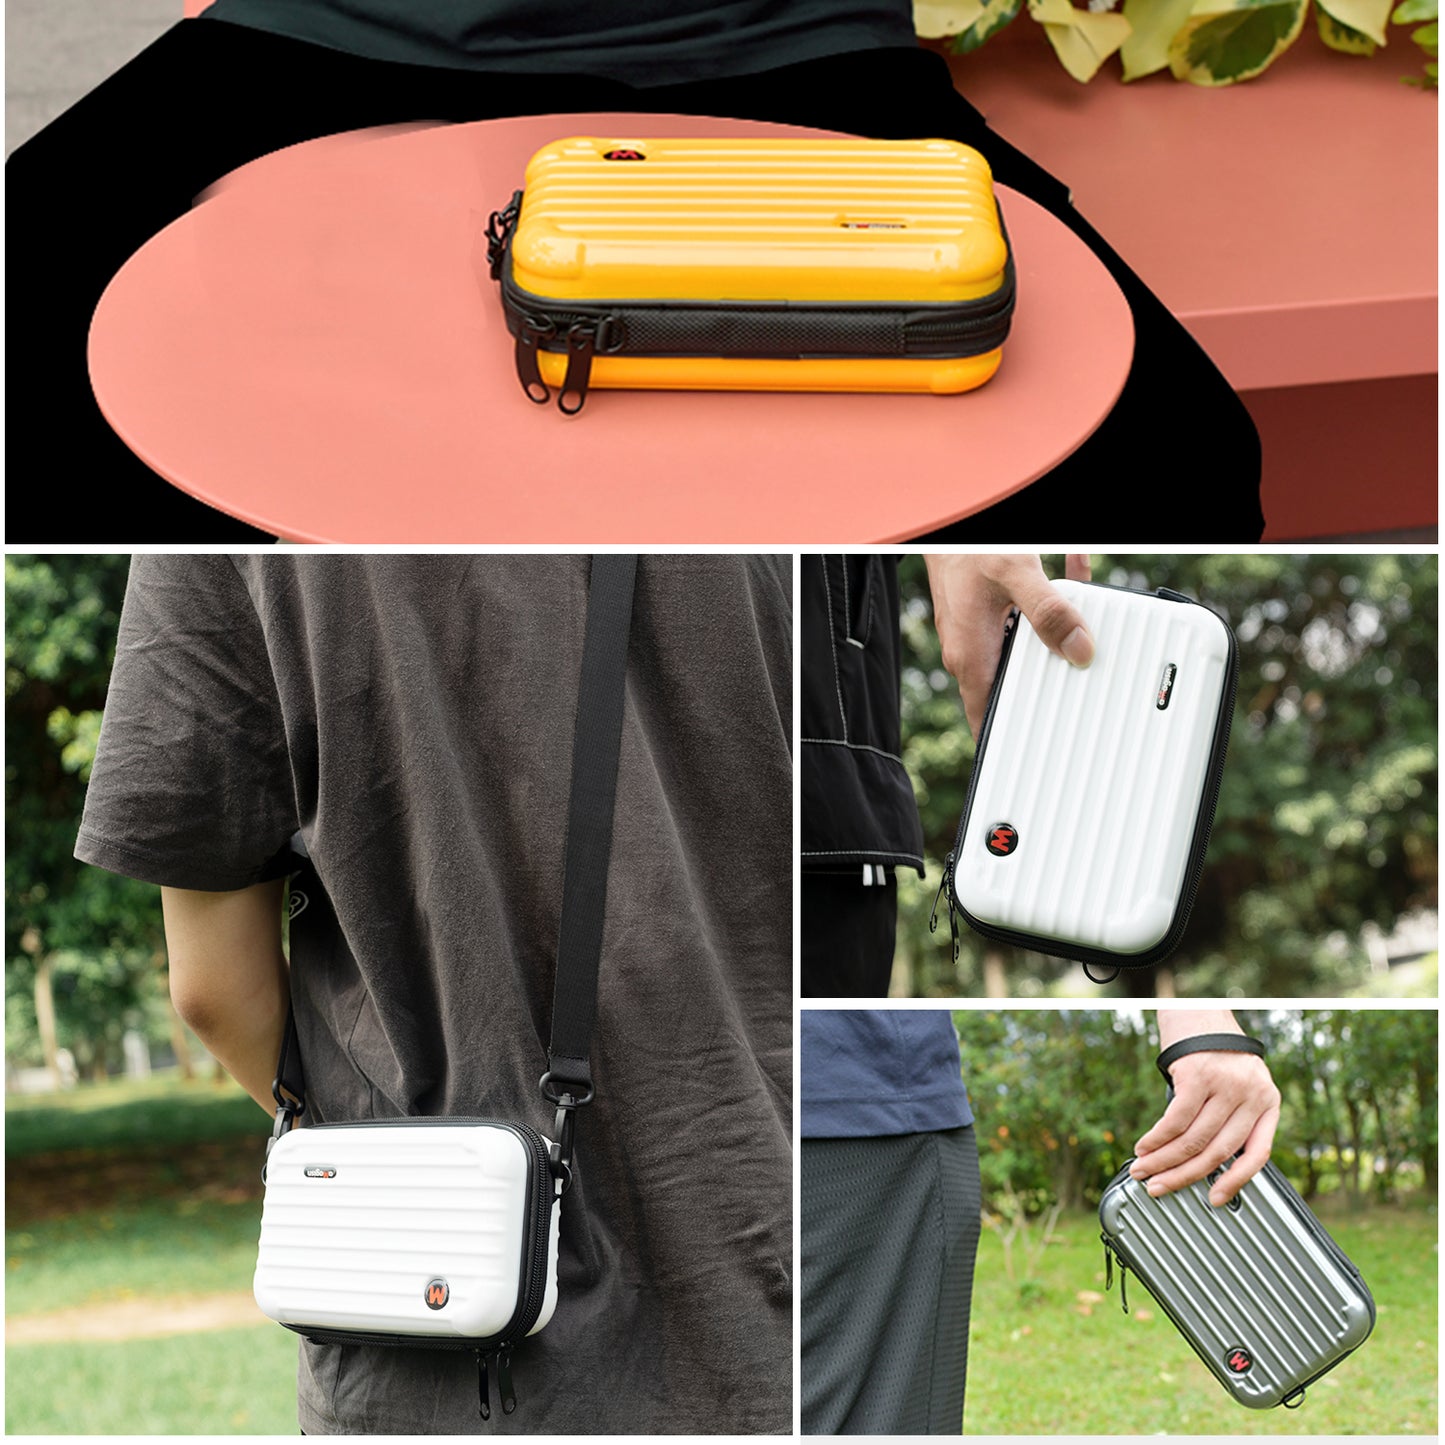 Carrying Case for Insta360 GO 3 Action Camera Accessories Portable Storage Bag